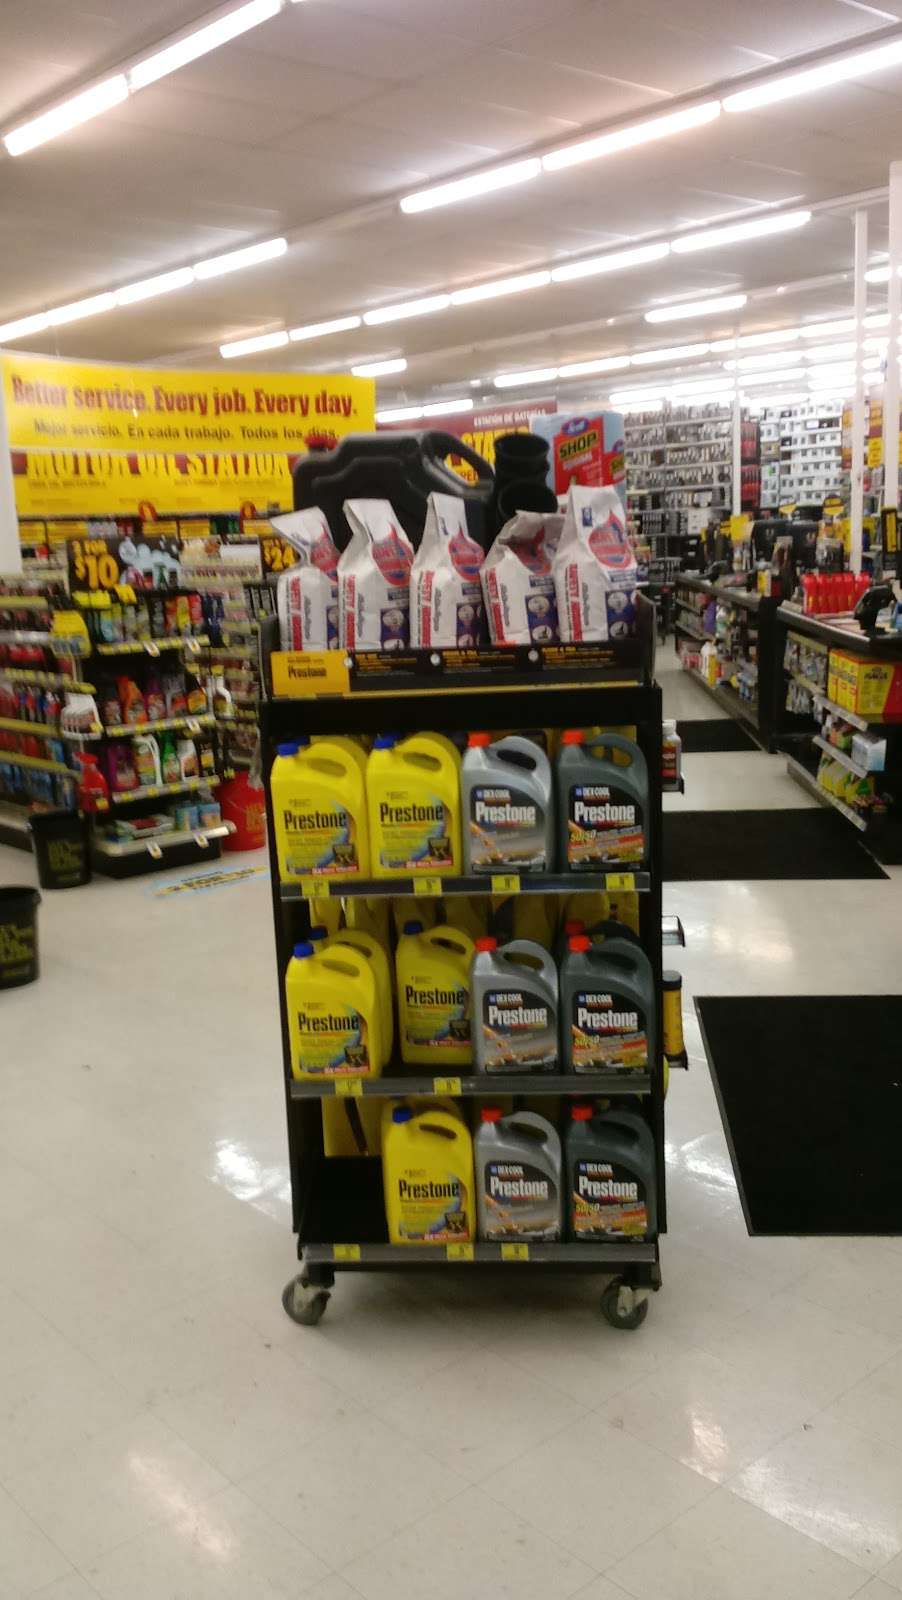 Advance Auto Parts | 17629 Virginia Ave, Hagerstown, MD 21740 | Phone: (301) 766-4066